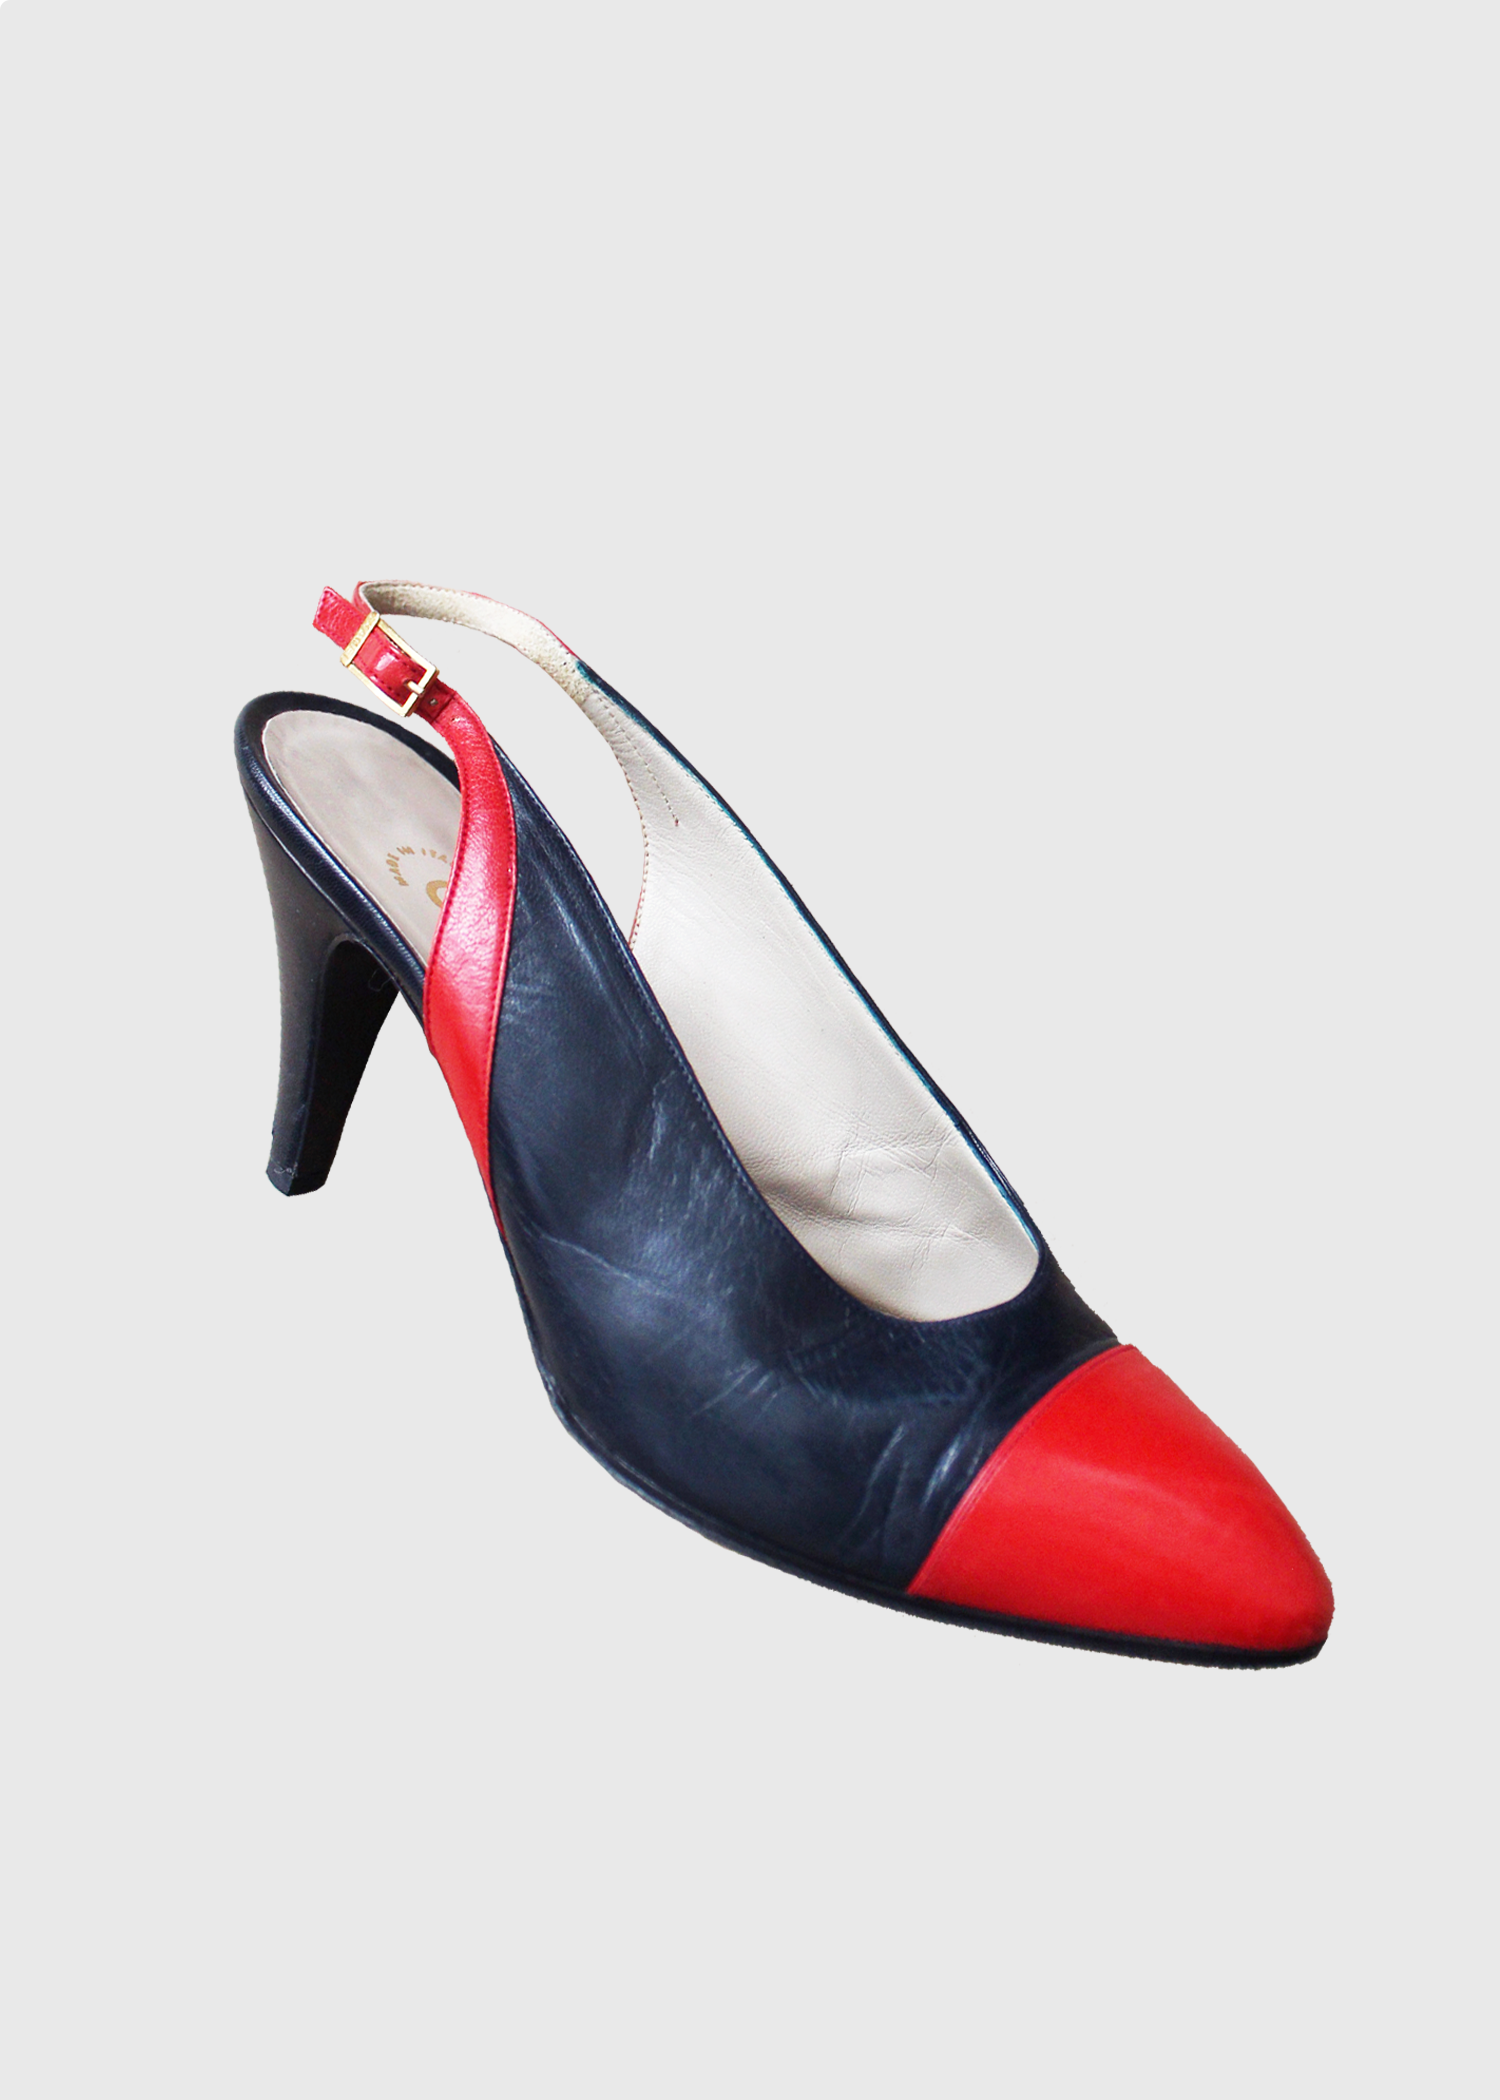 Chanel Vtg Navy and Red Slingbacks- Size 7.5